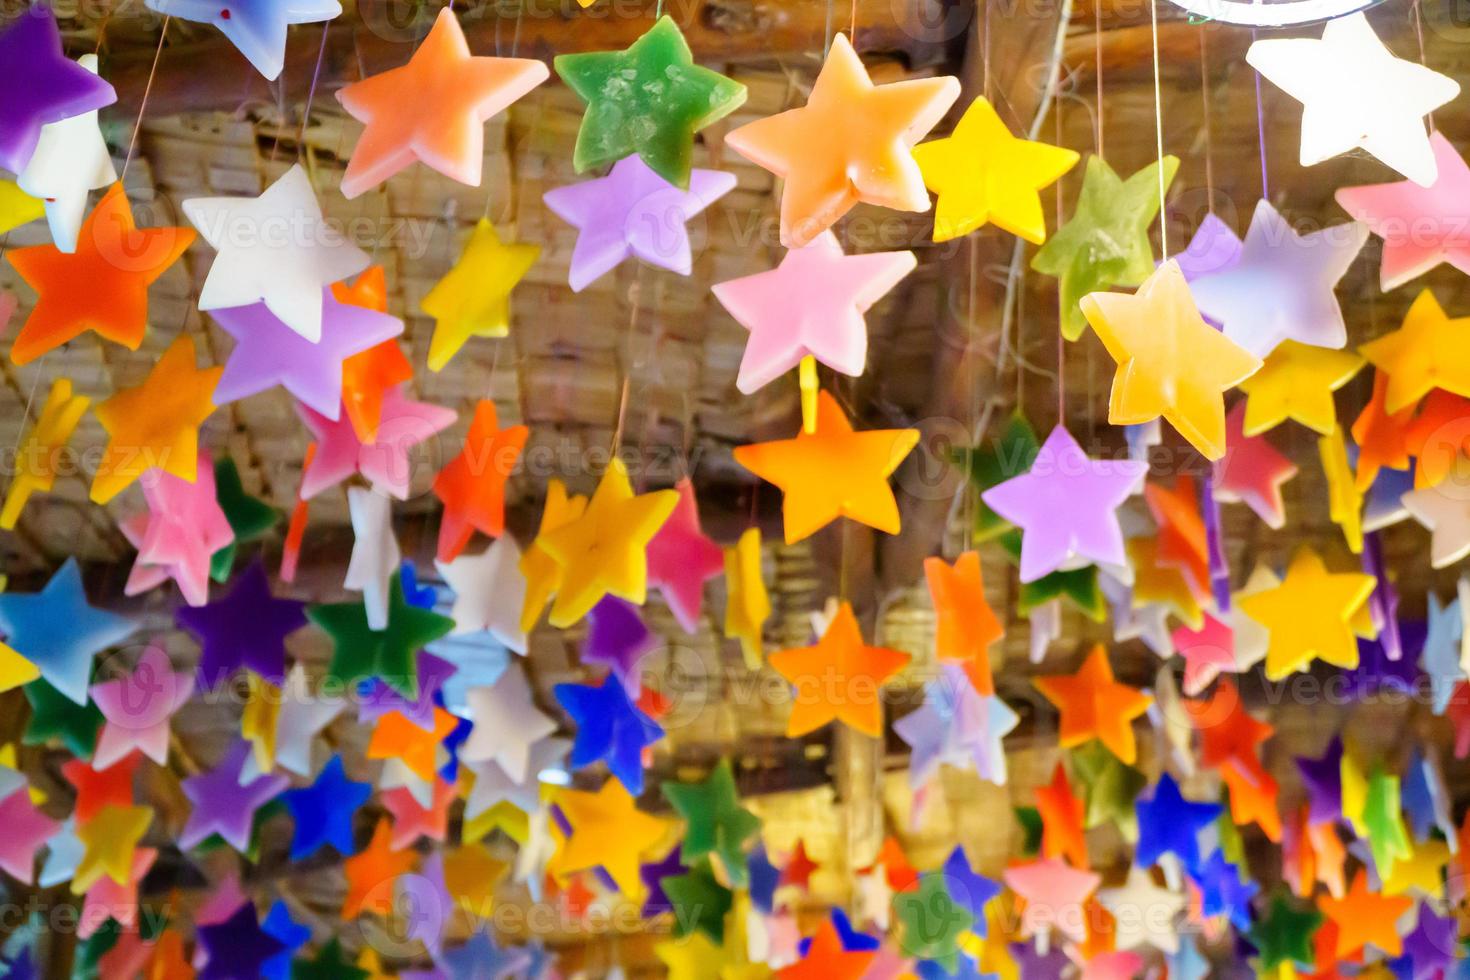 Multicolored candles cast in the shape of a star. photo